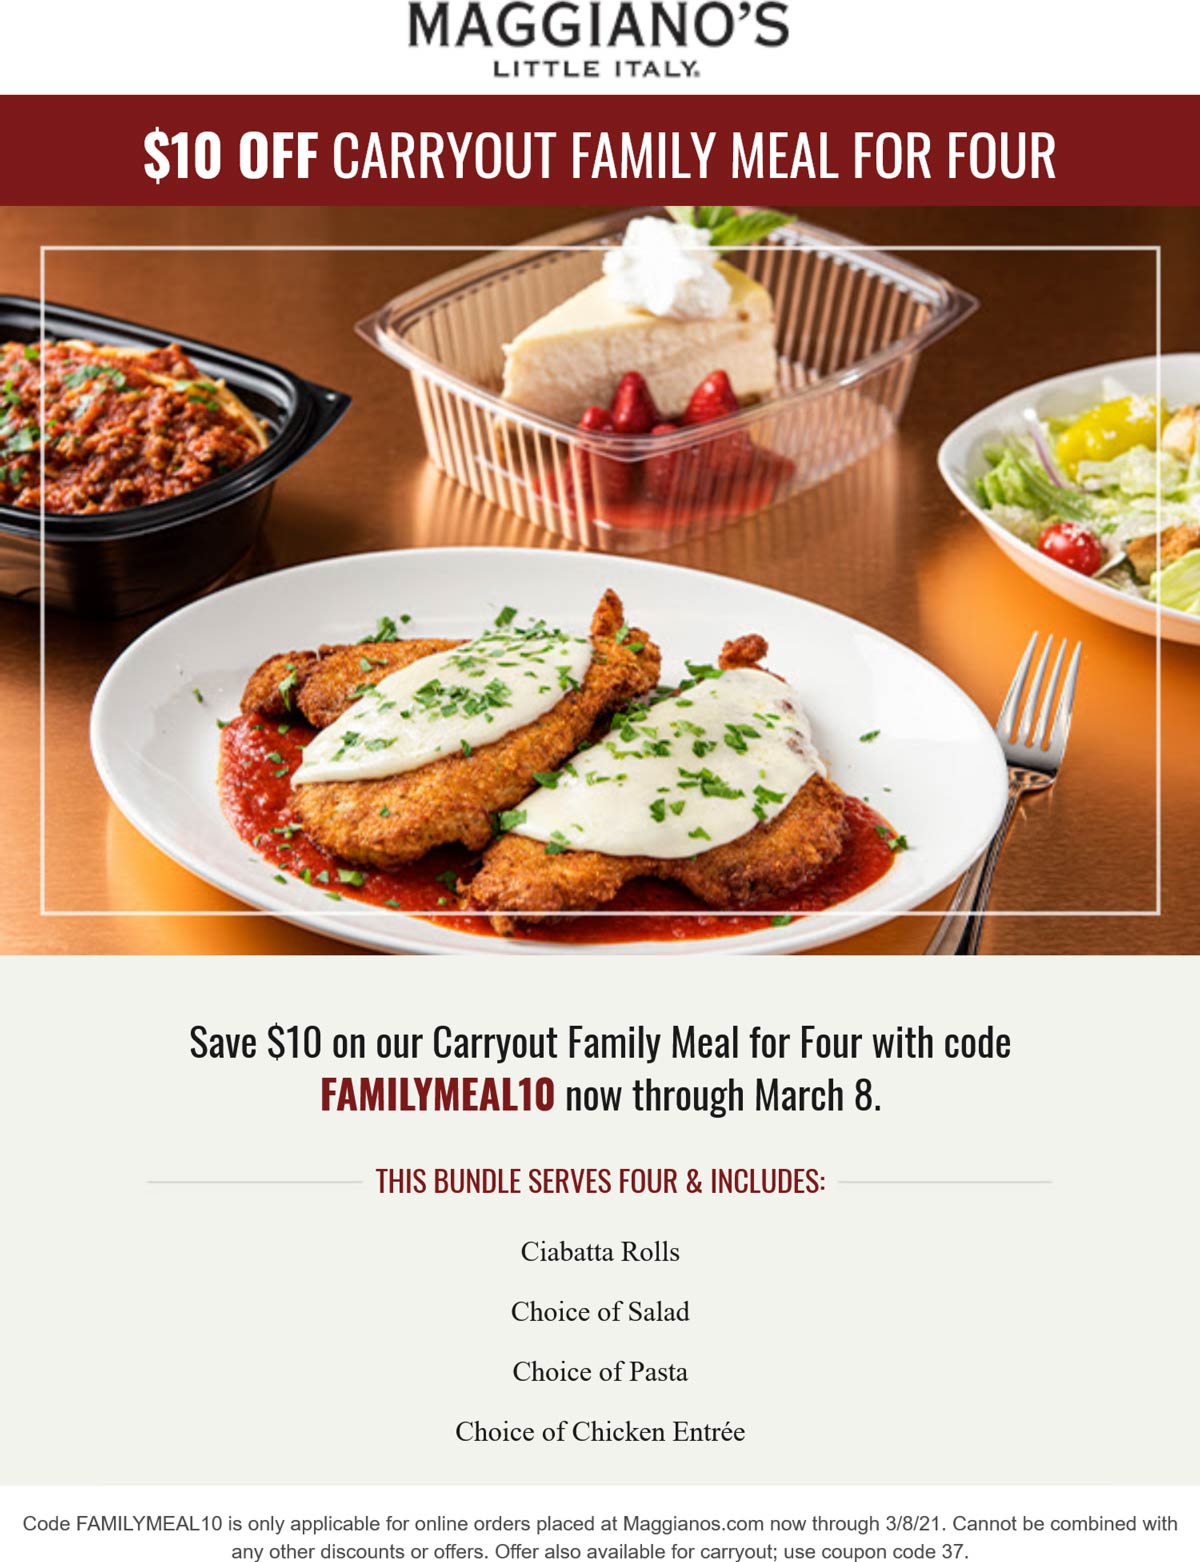 Maggianos Little Italy restaurants Coupon  $10 off carryout family meal at Maggianos Little Italy #maggianoslittleitaly 